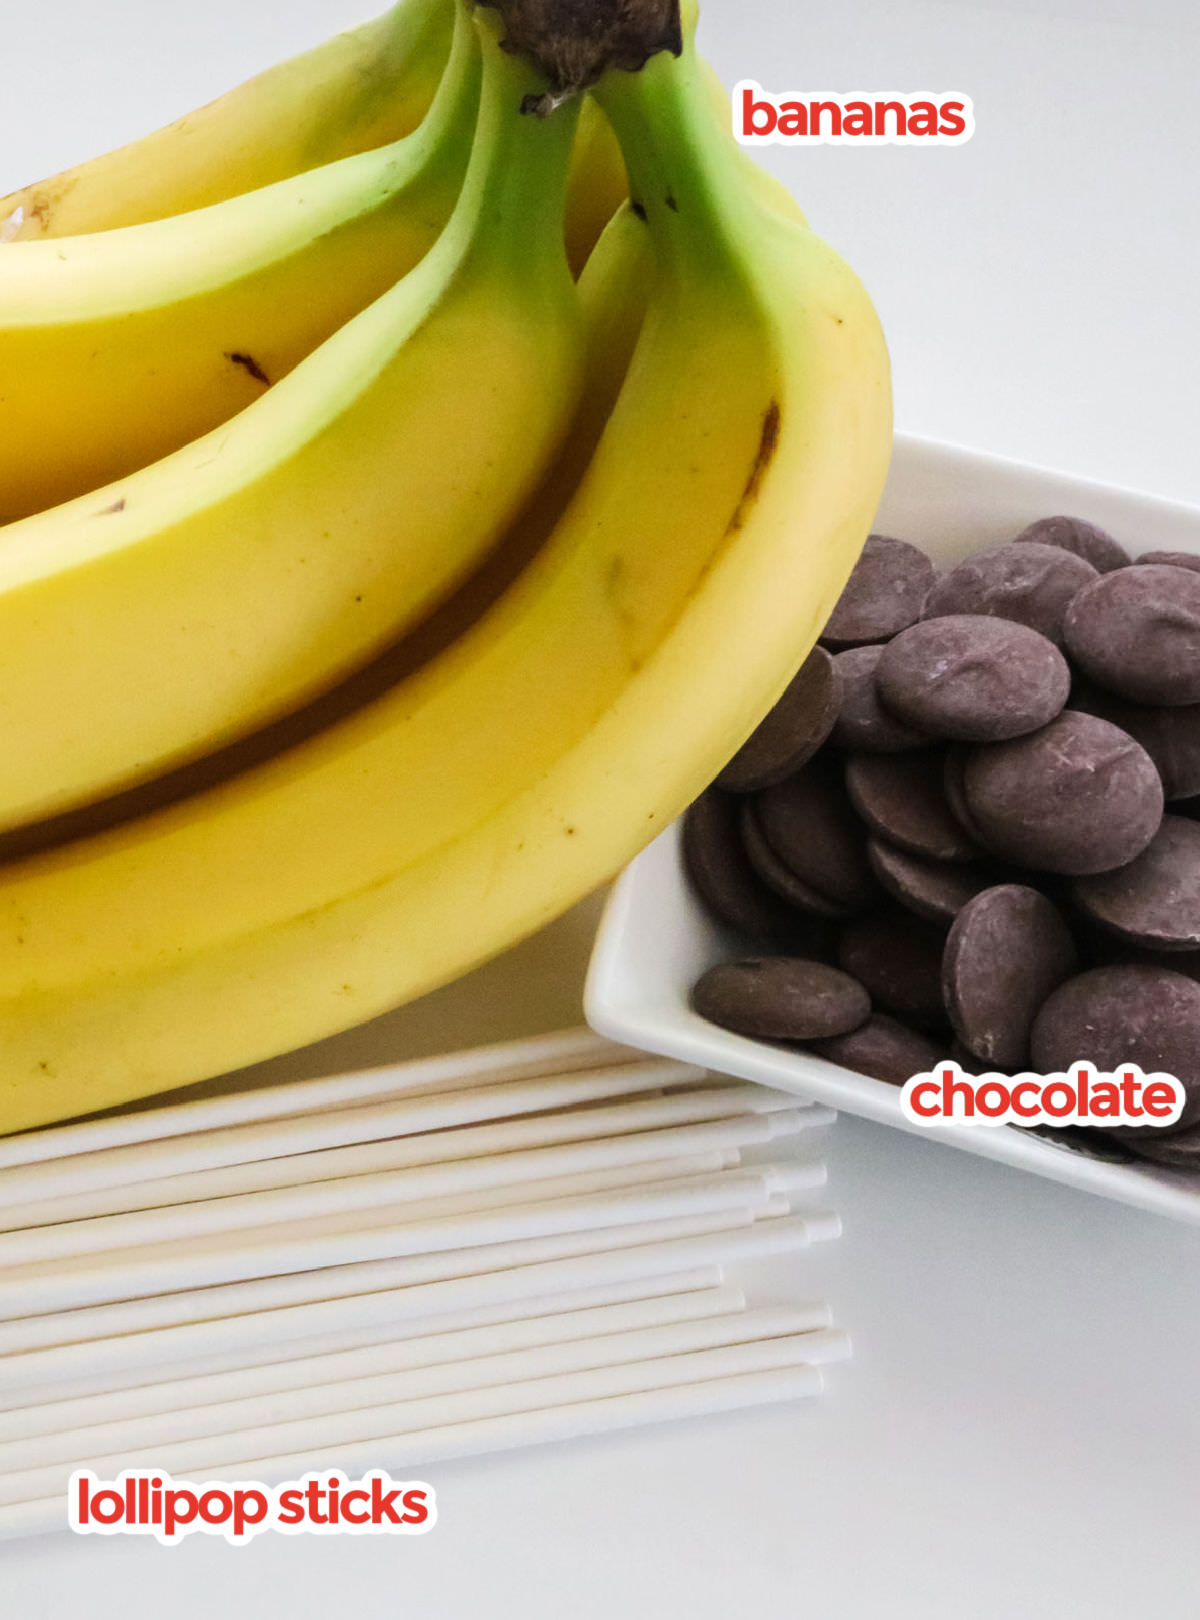 All the ingredients you will need to make a Homemade Frozen Banana including bananas, chocolate and lollipop sticks.